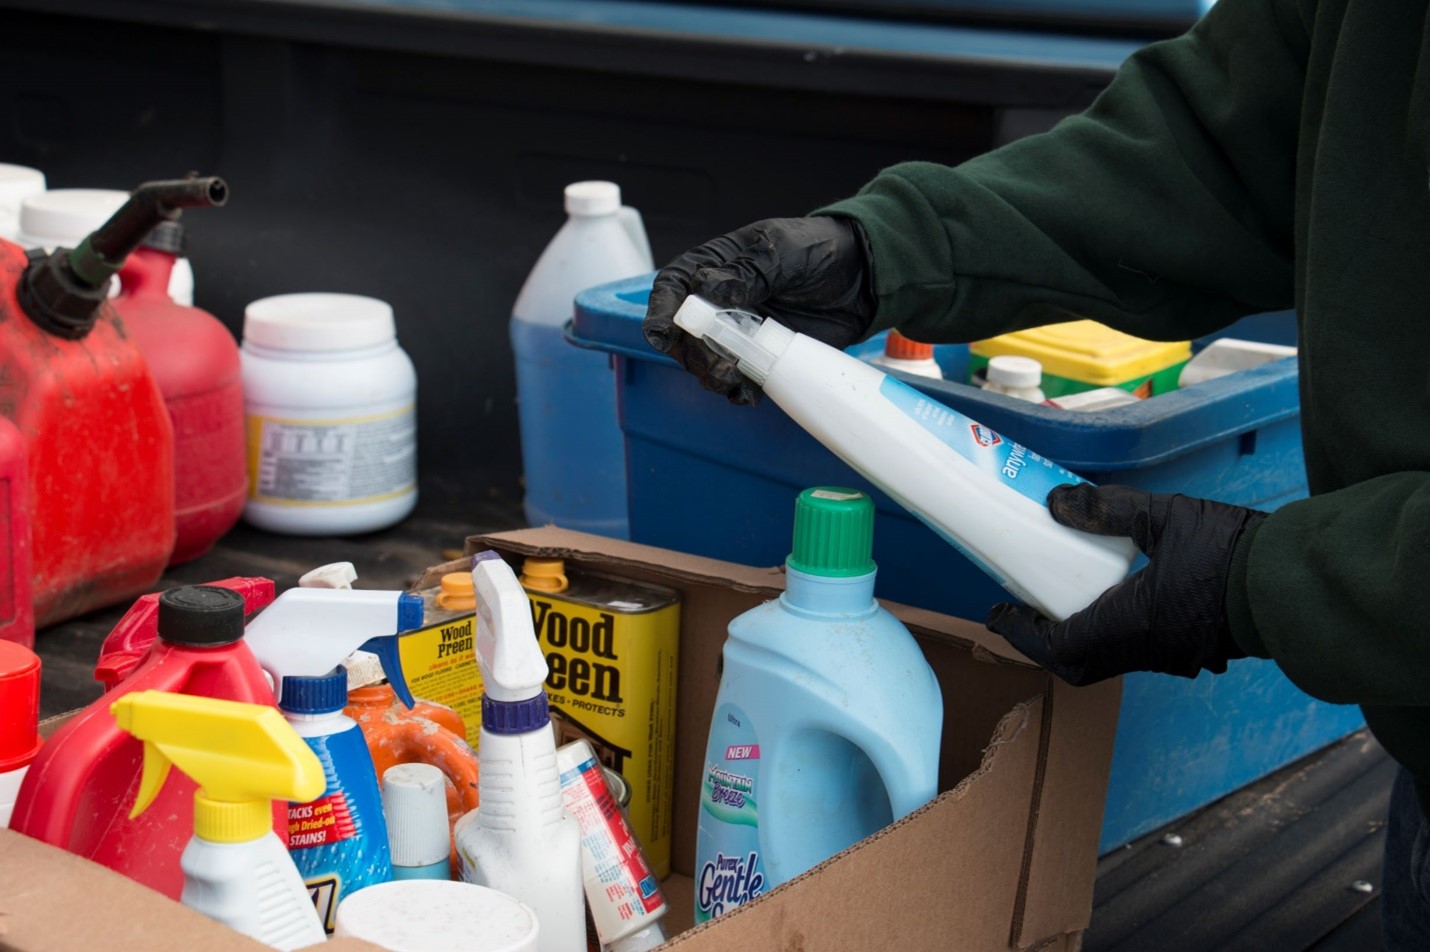 A worker handling a bottle of bleach over a box full of cleaning supplies.